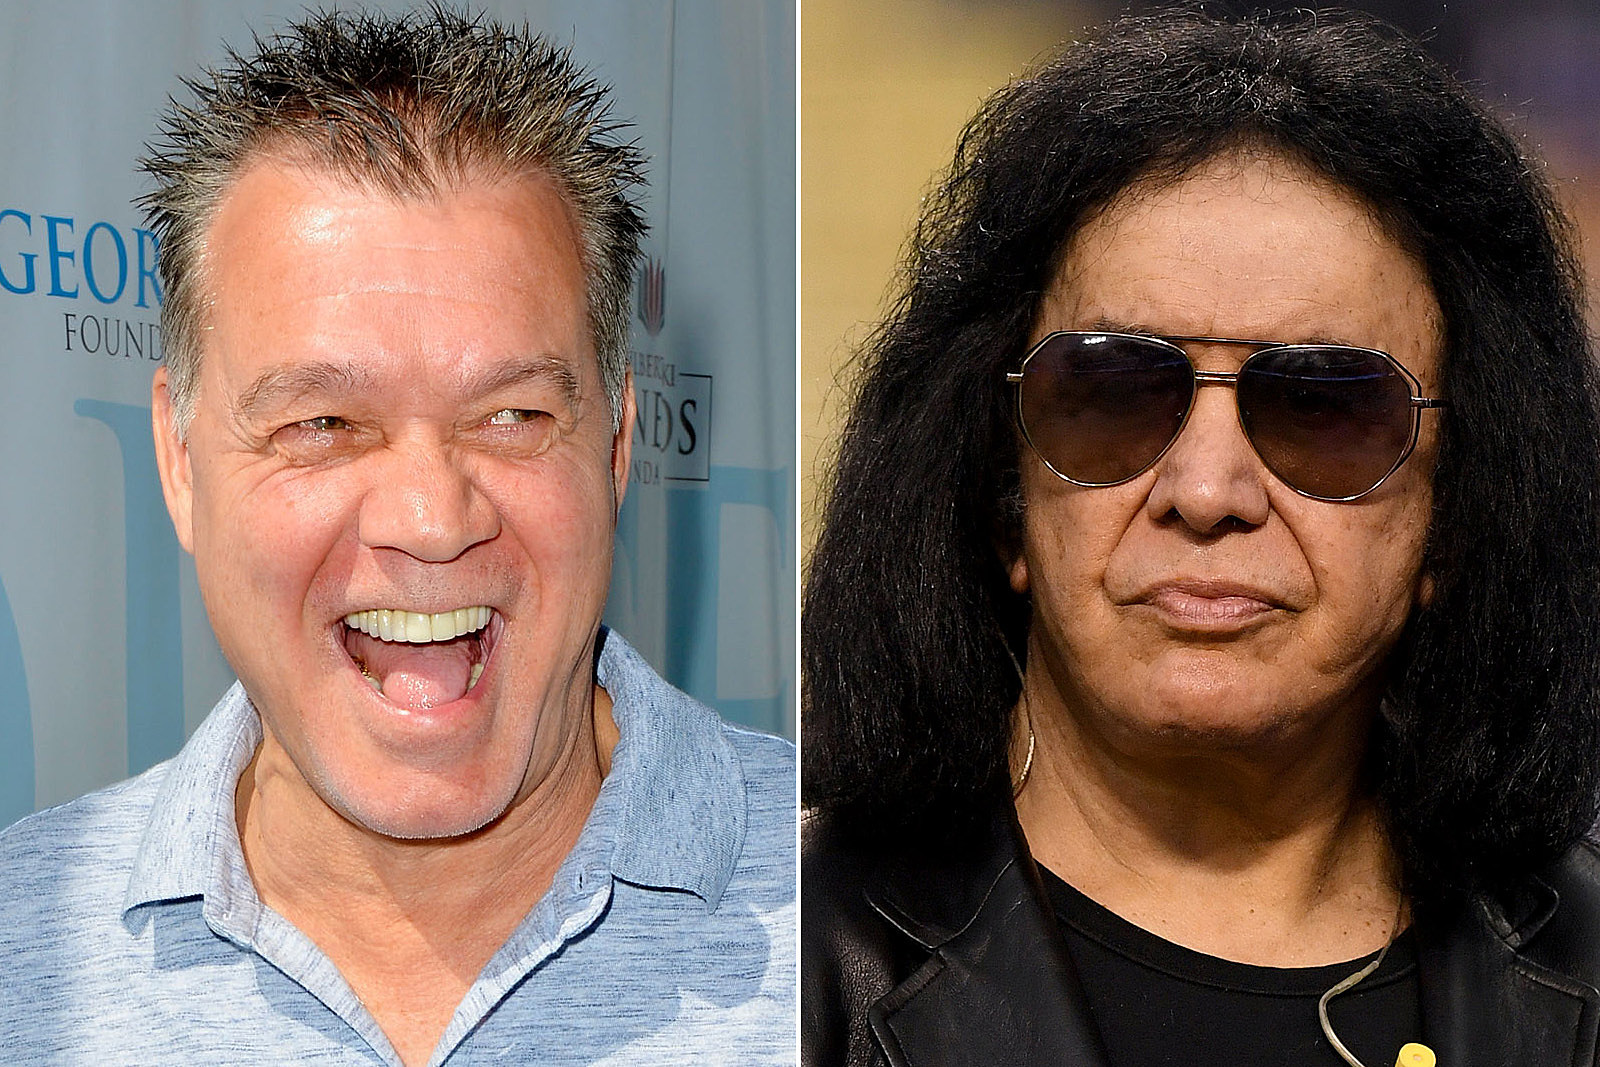 Eddie Van Halen Made Gene Simmons Want to Be a Better Person